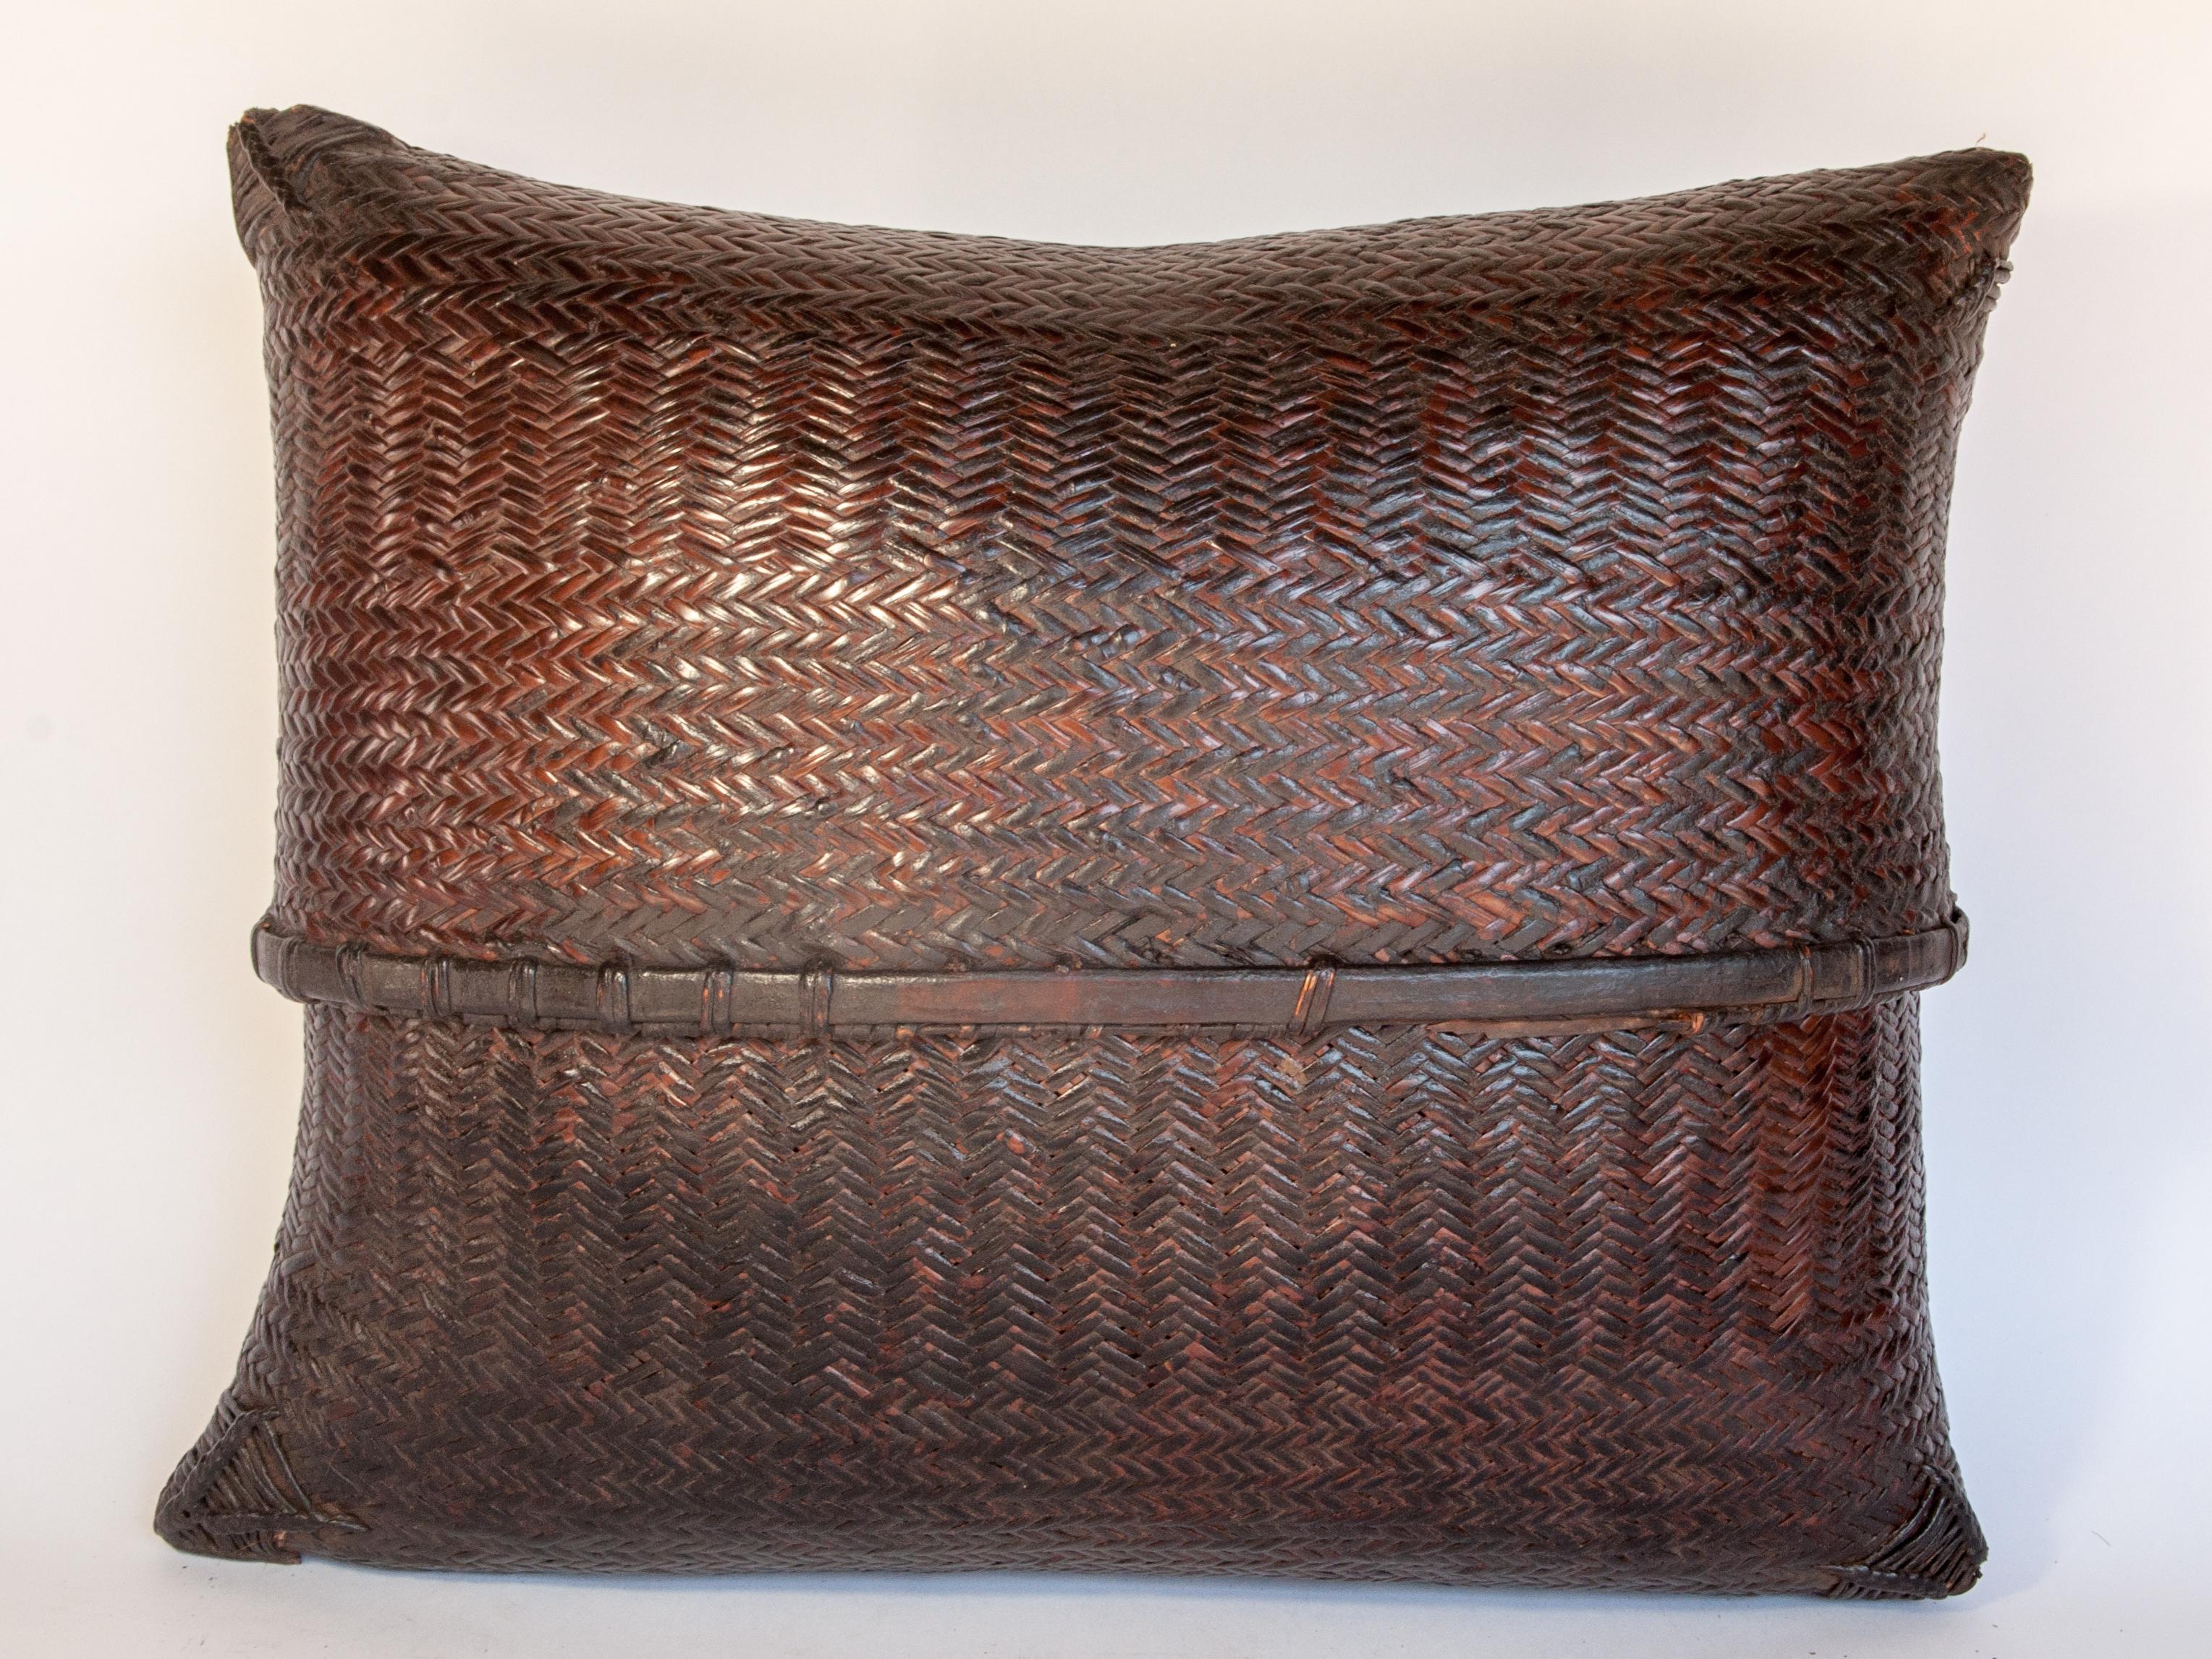 Large vintage double weave tribal pouch basket from the Nepal Himal, mid-20th century
This rustic pouch comes from the Himalayan Foothills of Nepal. Made by hand from bamboo in a strong double weave construction, it's robust quality mirrors the